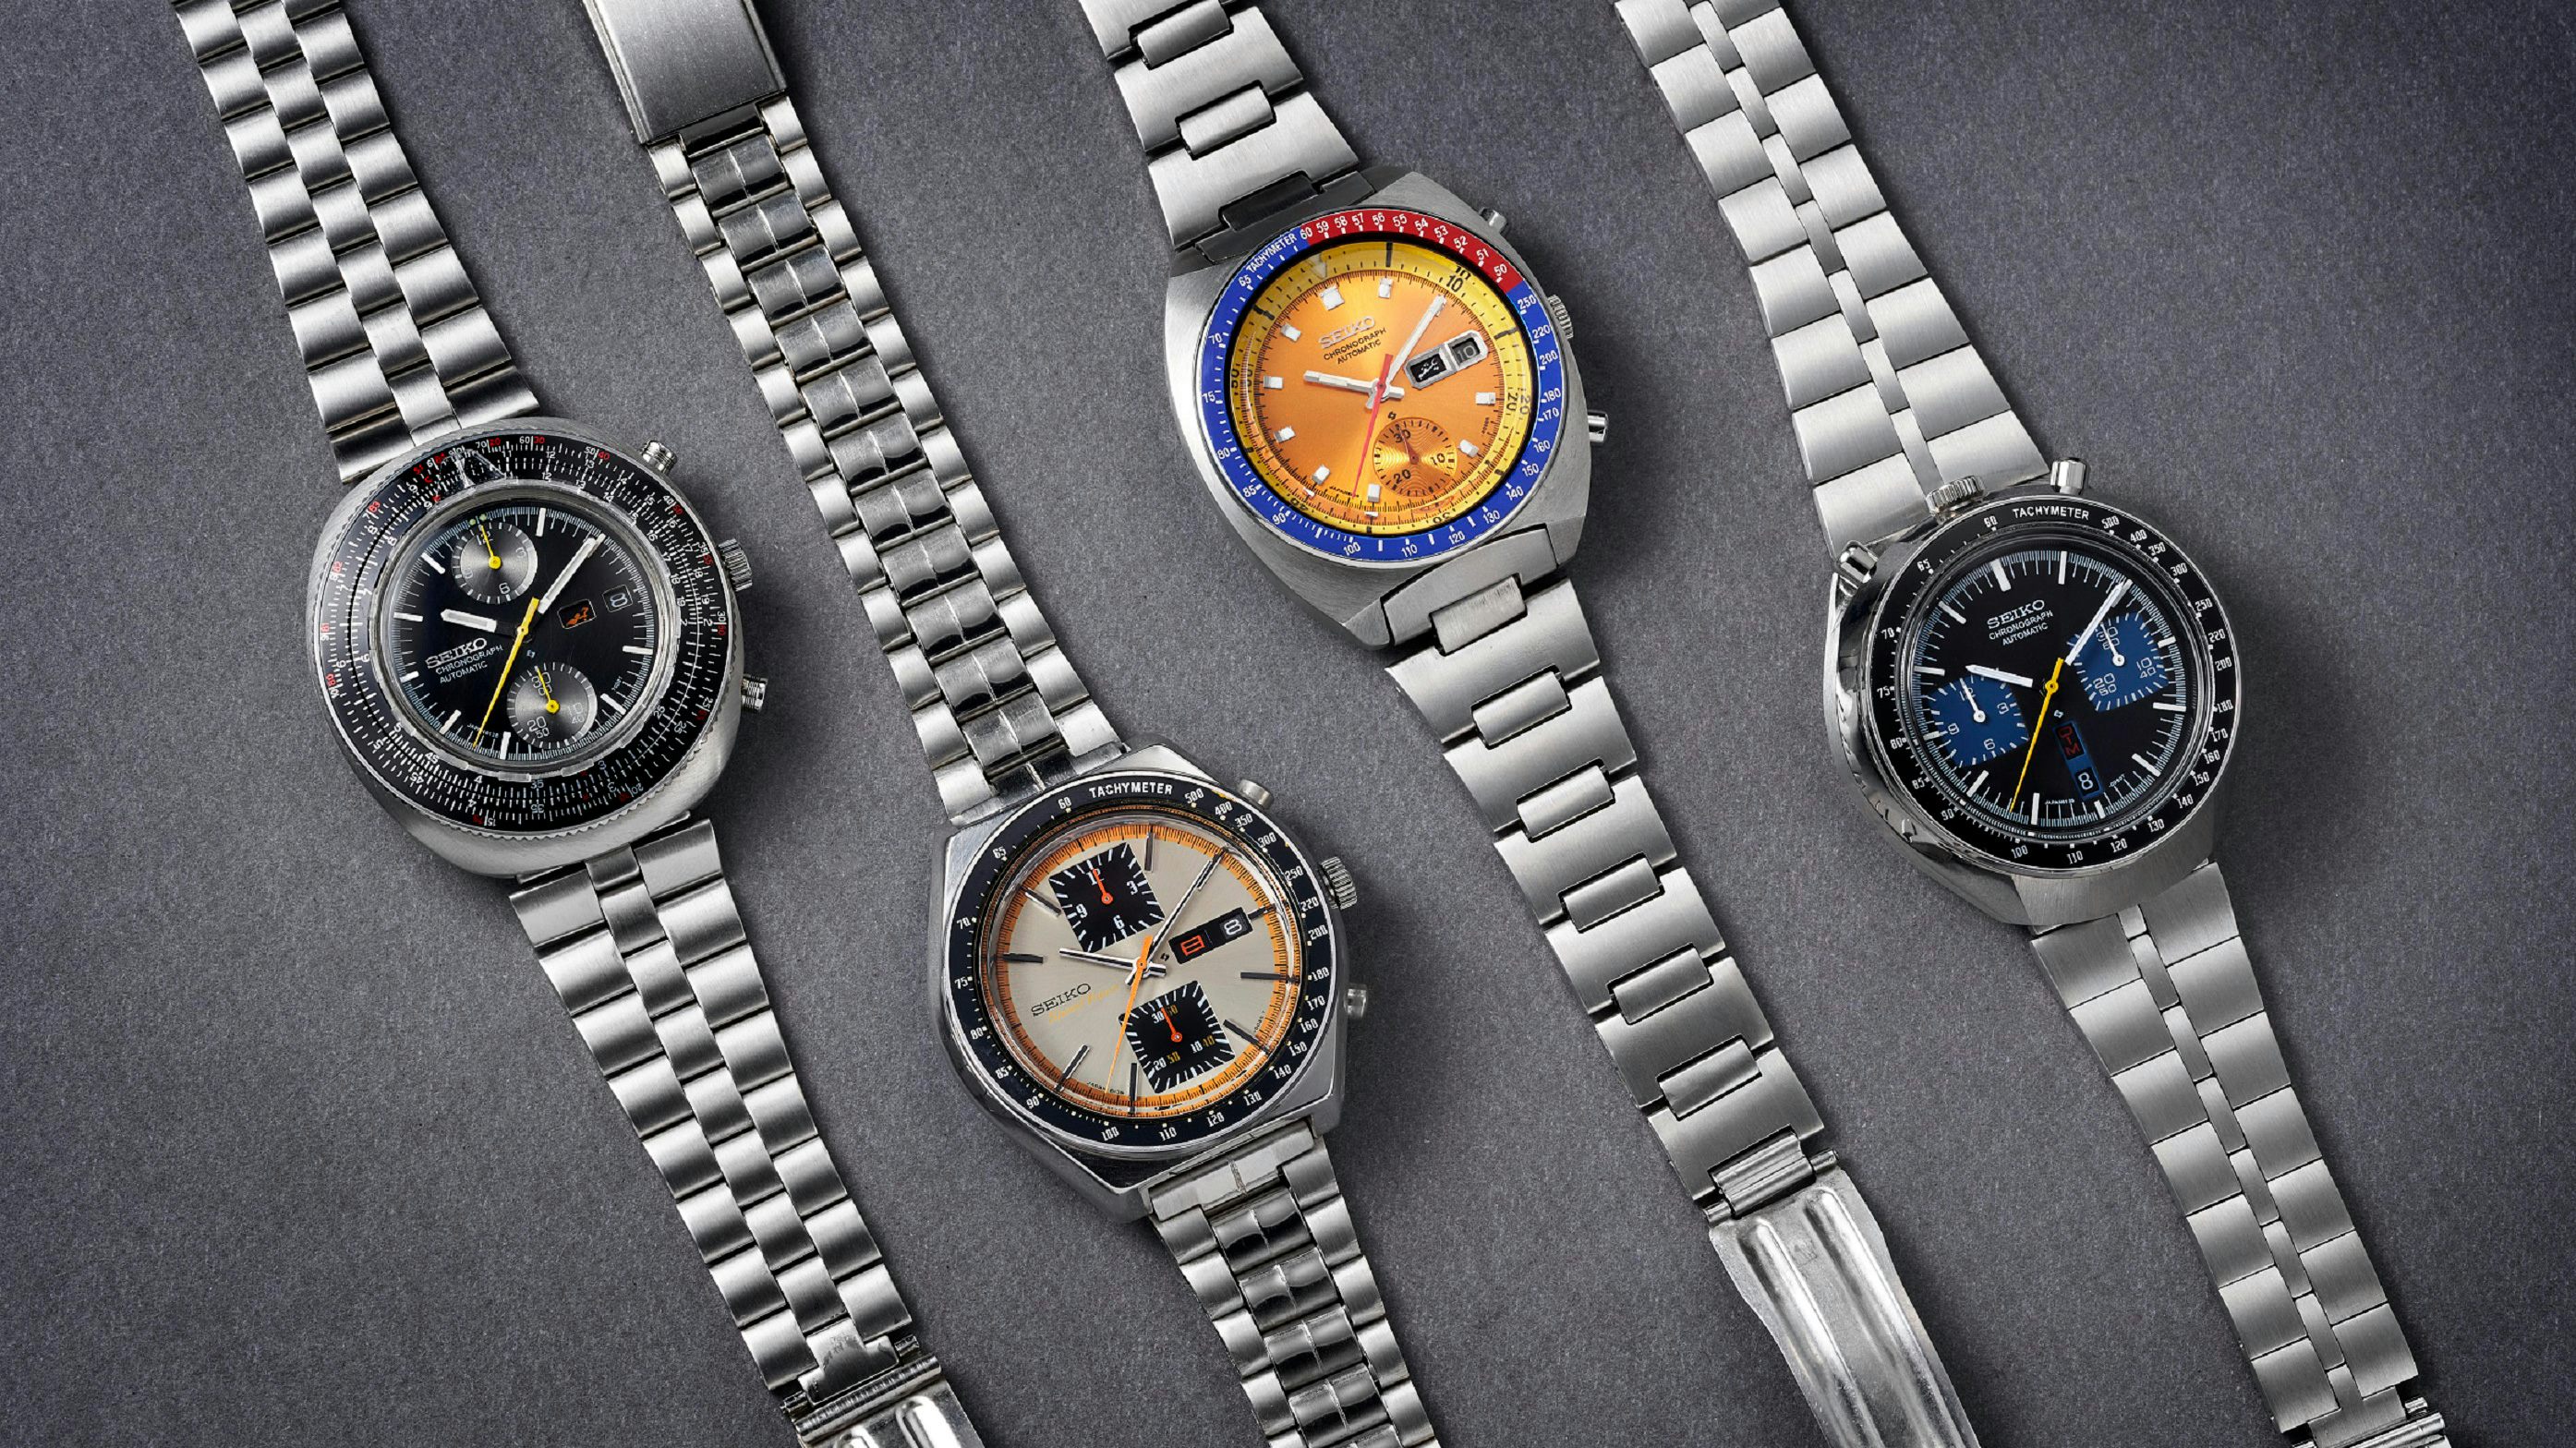 Breaking News: Bonhams' Seiko-Only Auction Disappears In The Wake